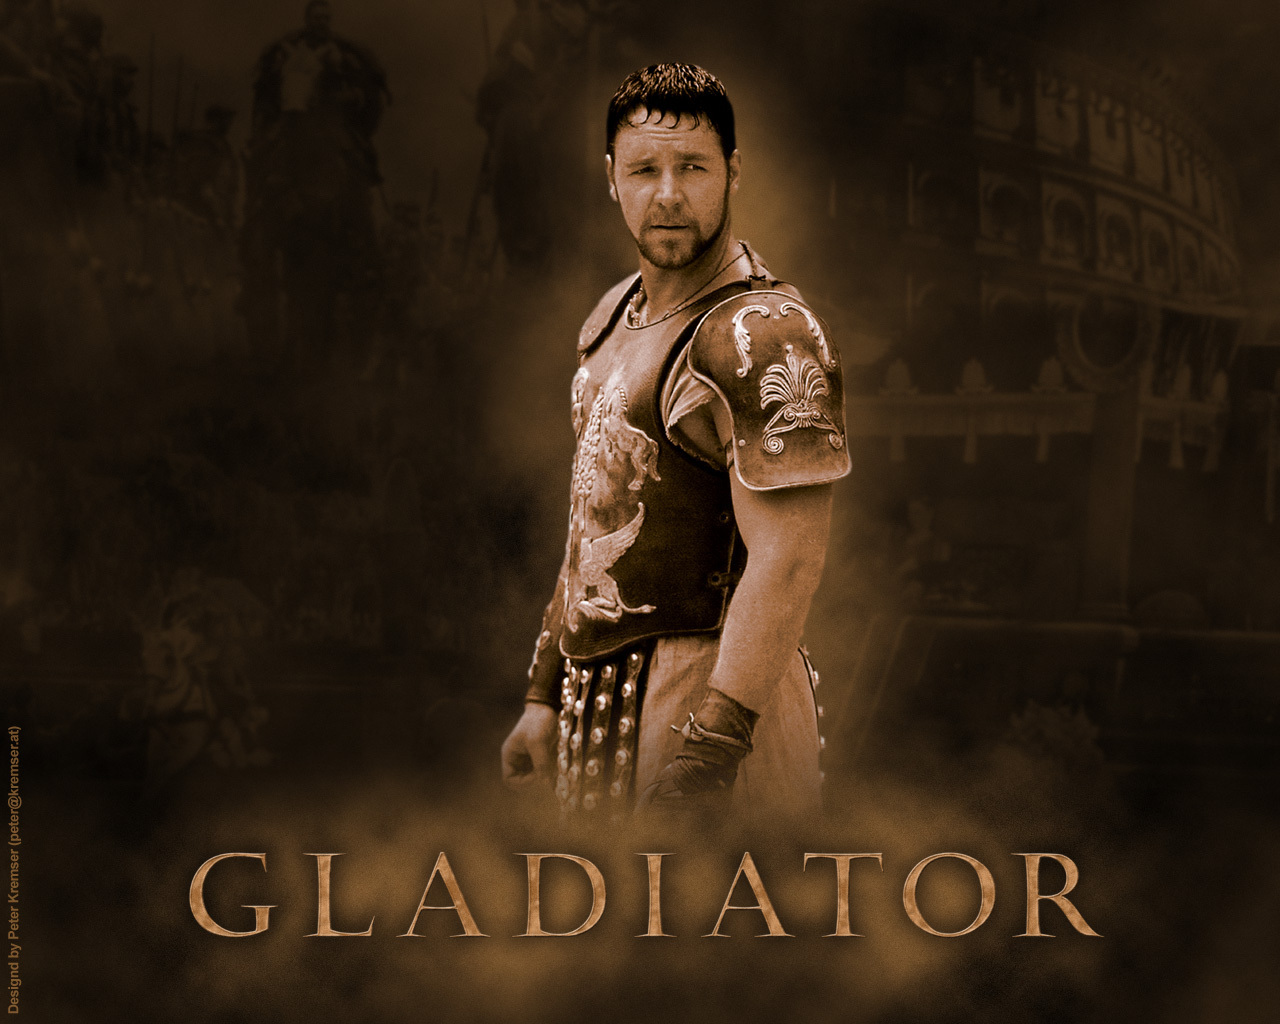 Gladiator - Russell Ira Crowe Gladiator , HD Wallpaper & Backgrounds